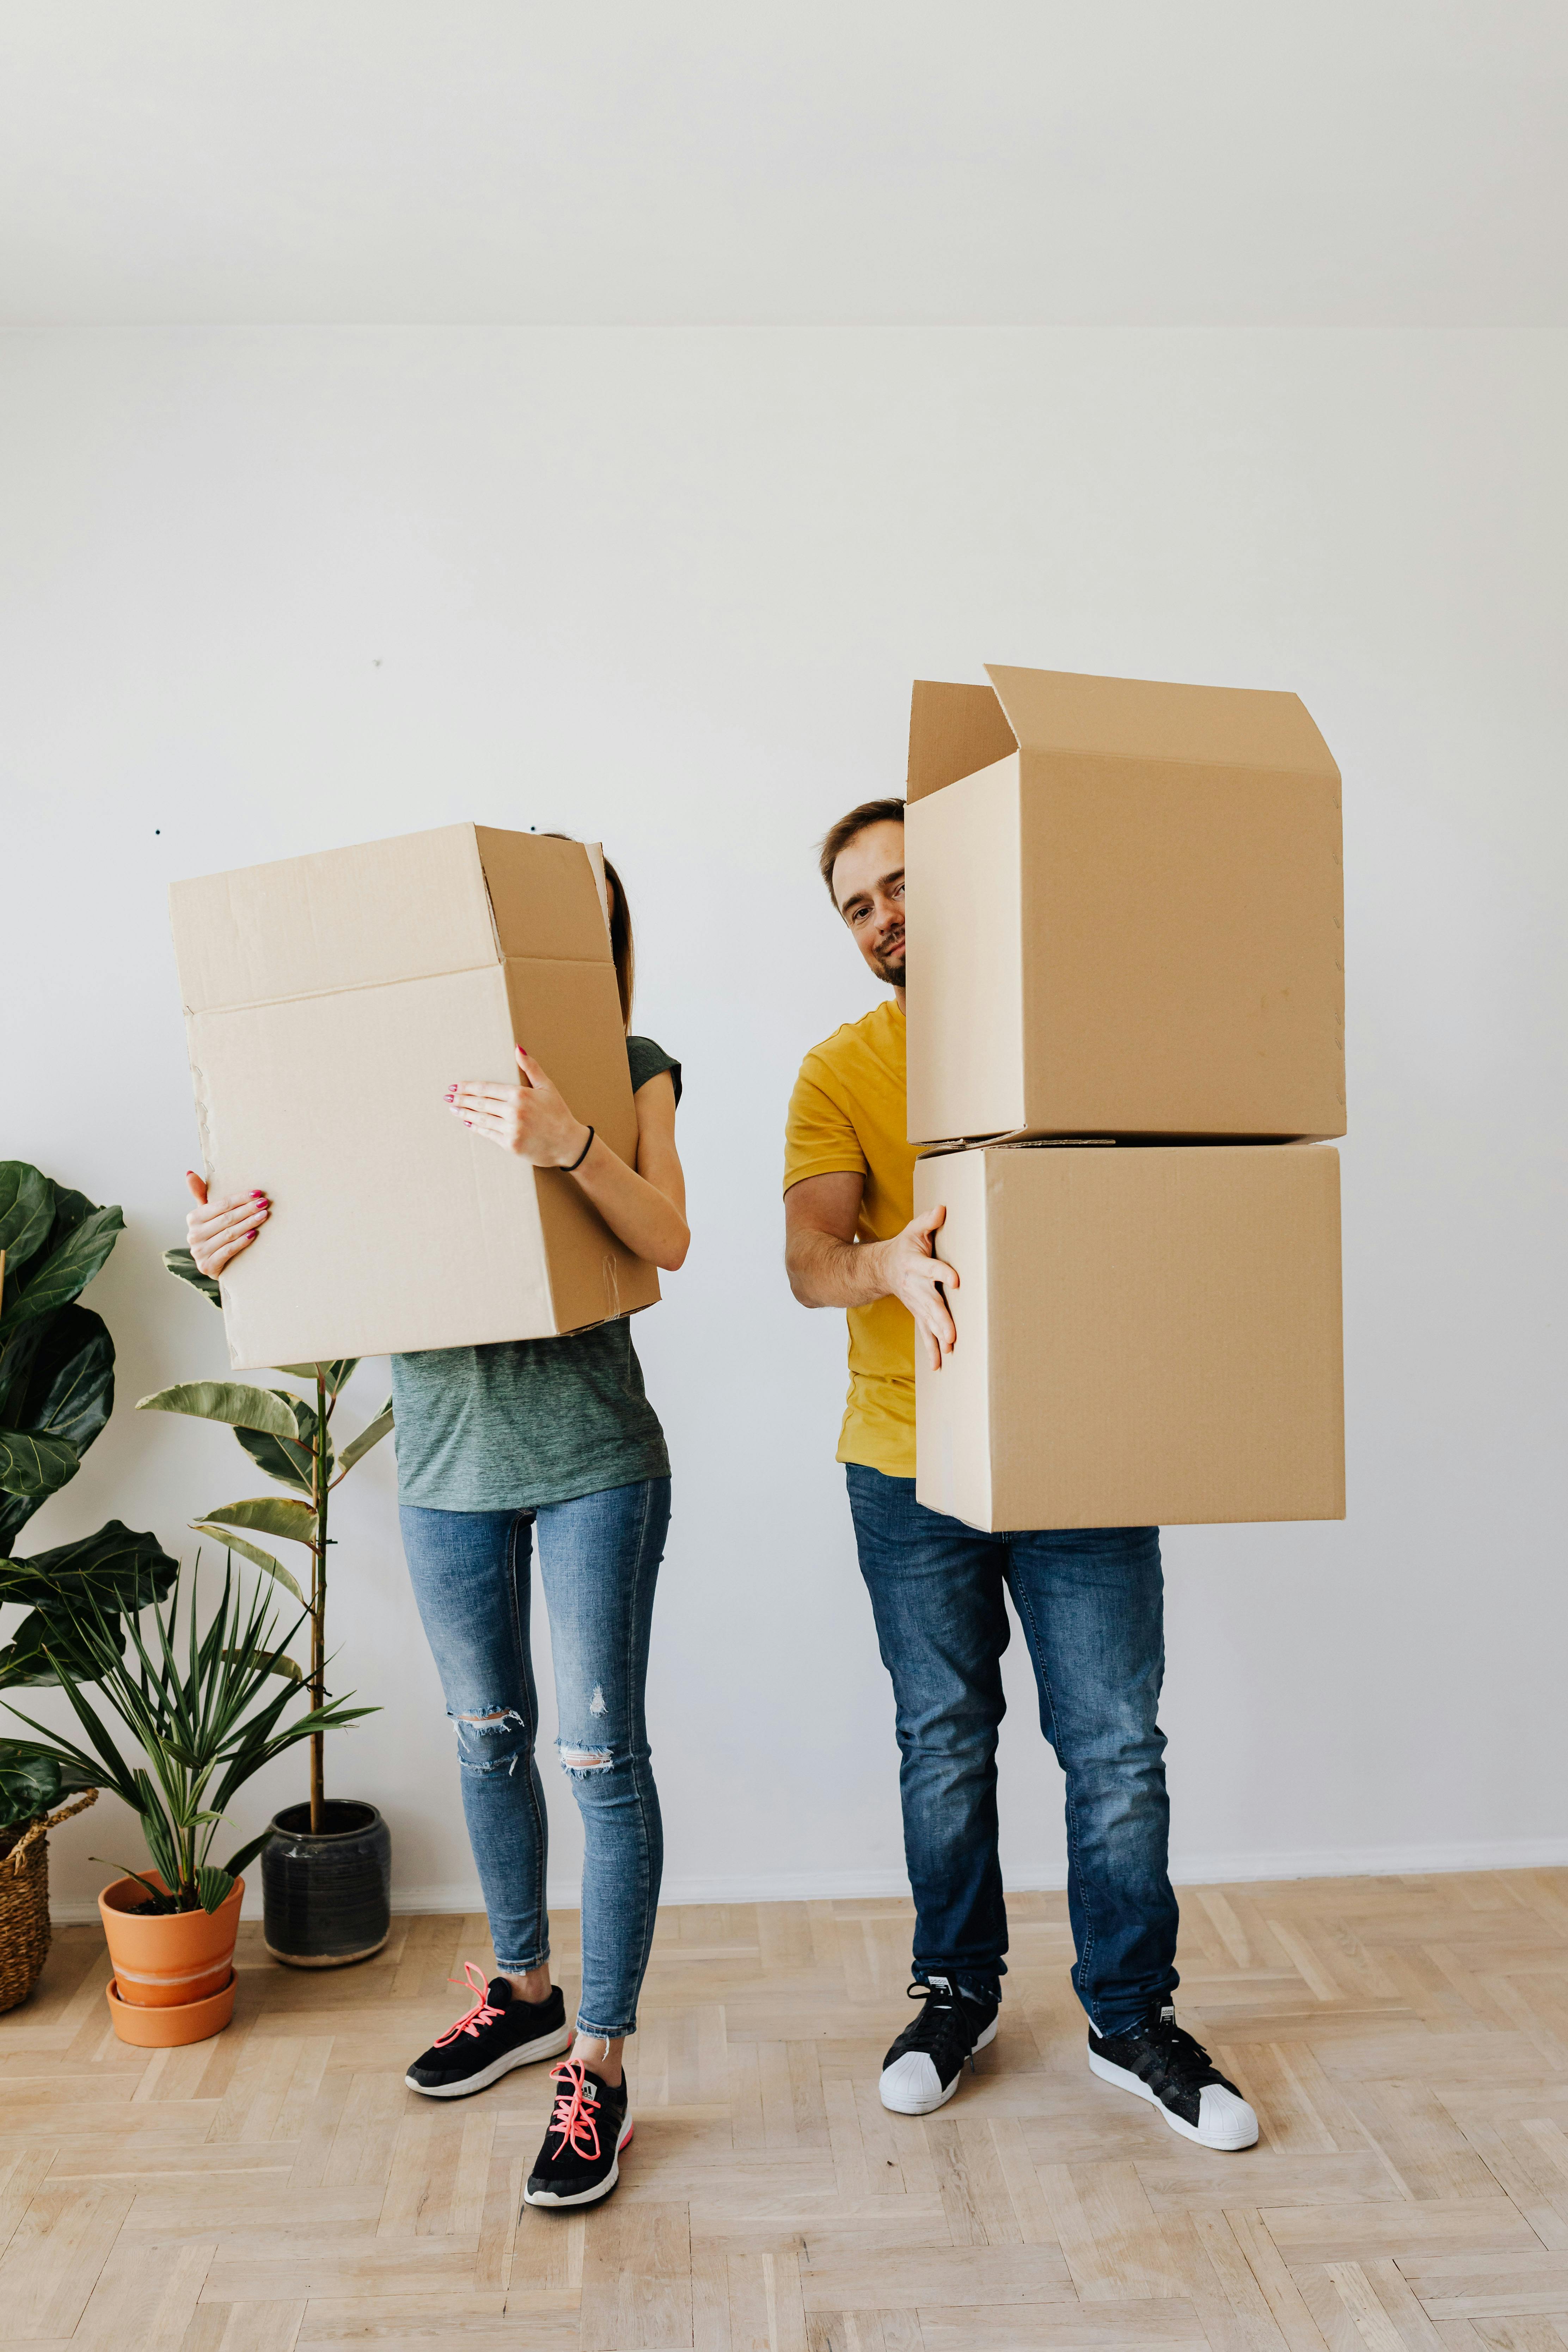 A couple holding boxes ready to move | Source: Pexels